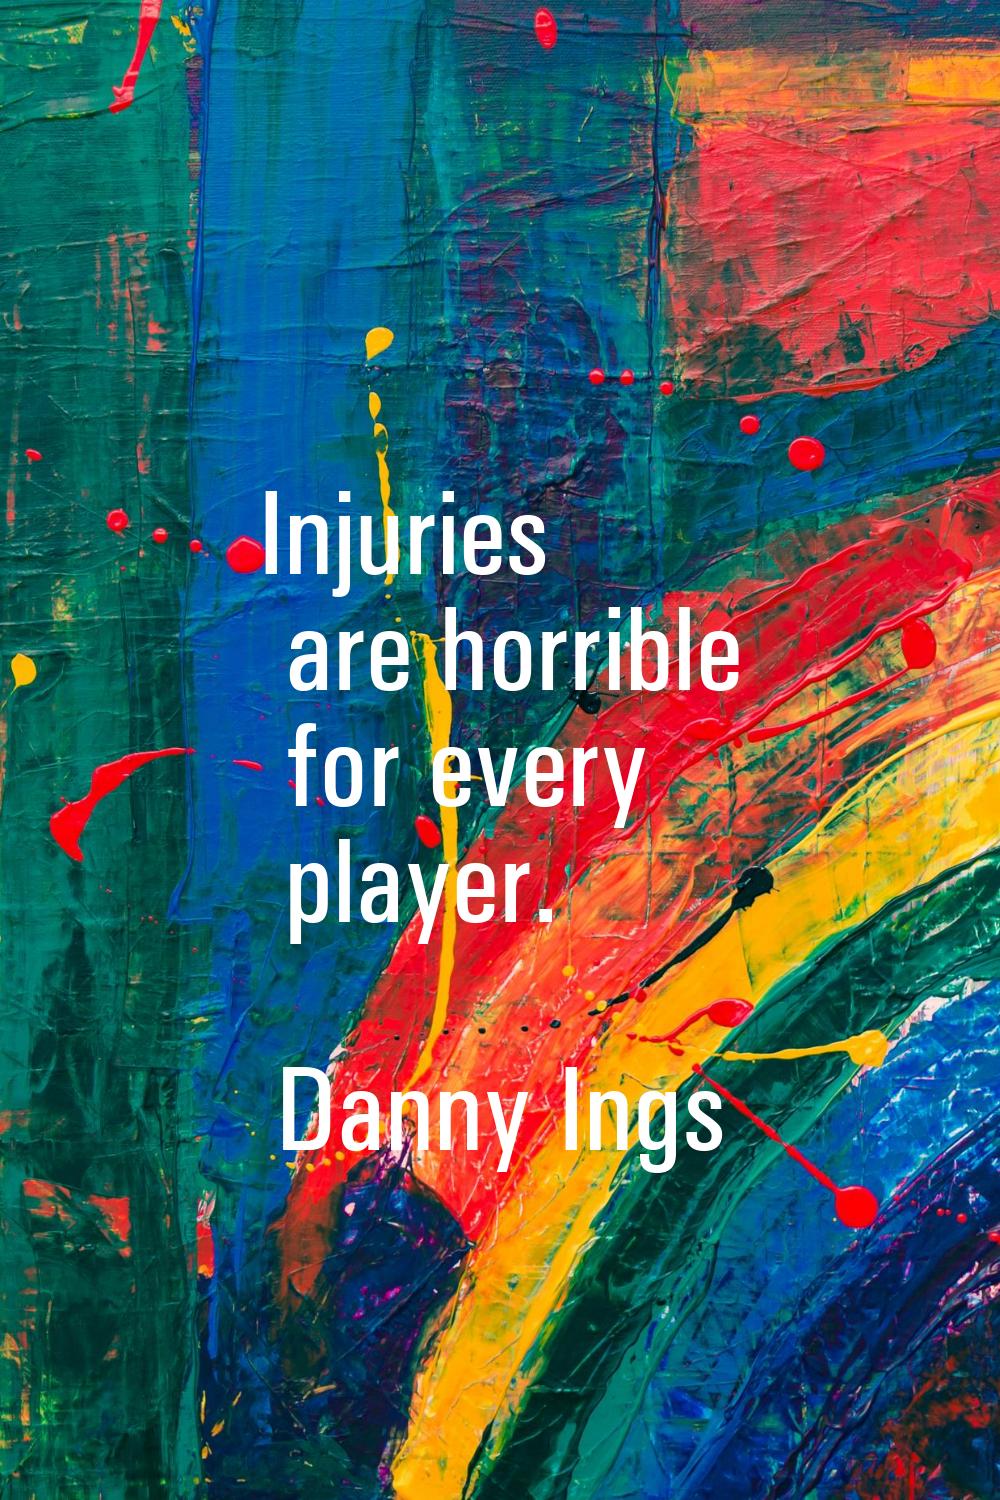 Injuries are horrible for every player.